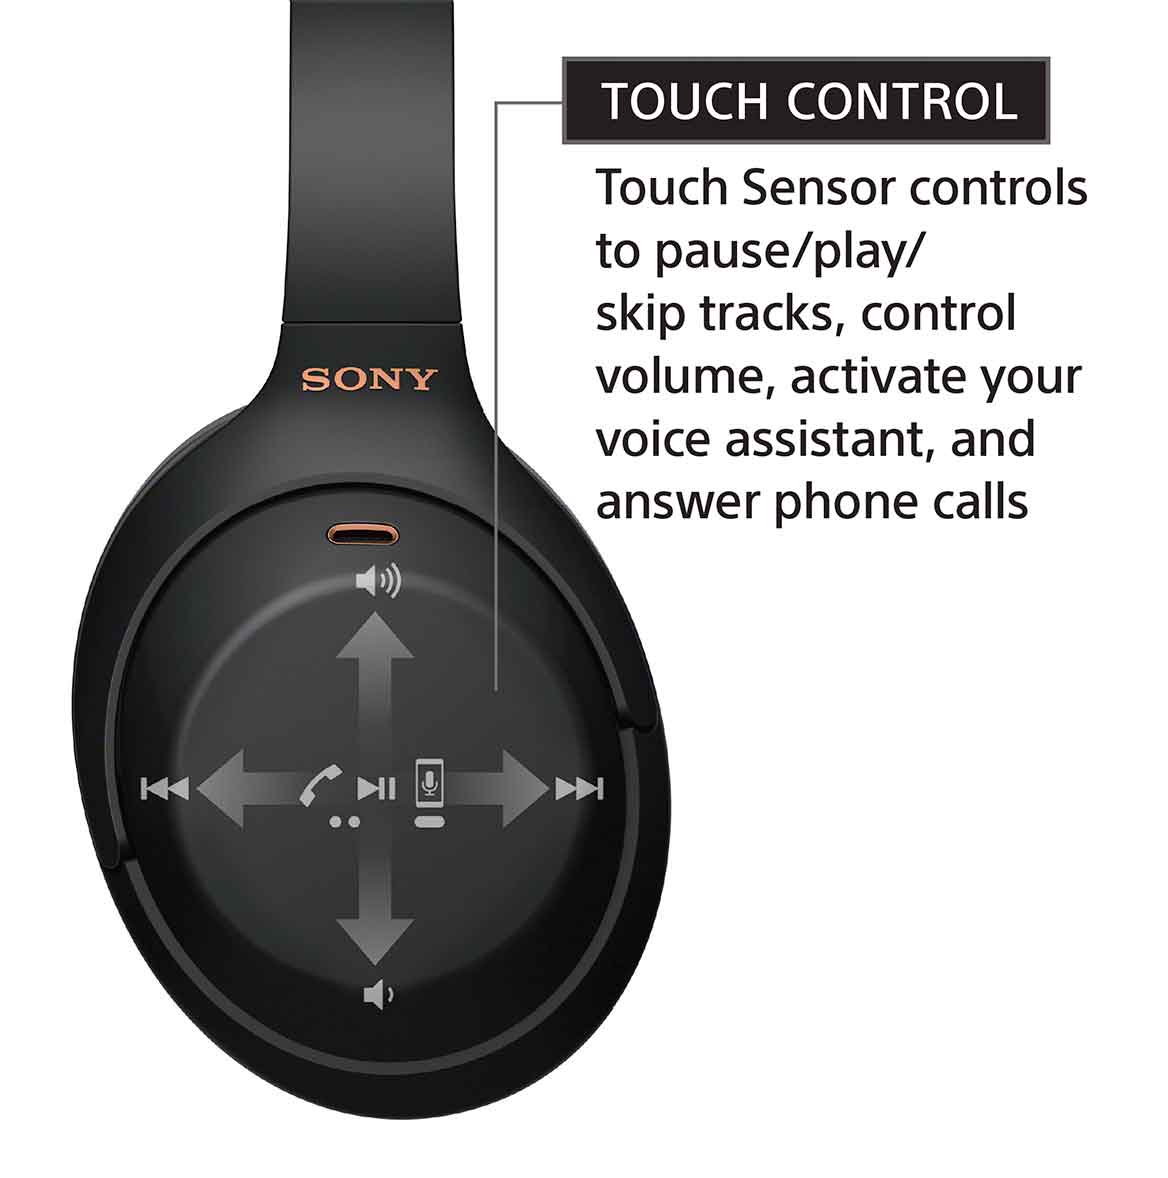 close up image of push button controls to raise or lower the volume of headphones and headsets.